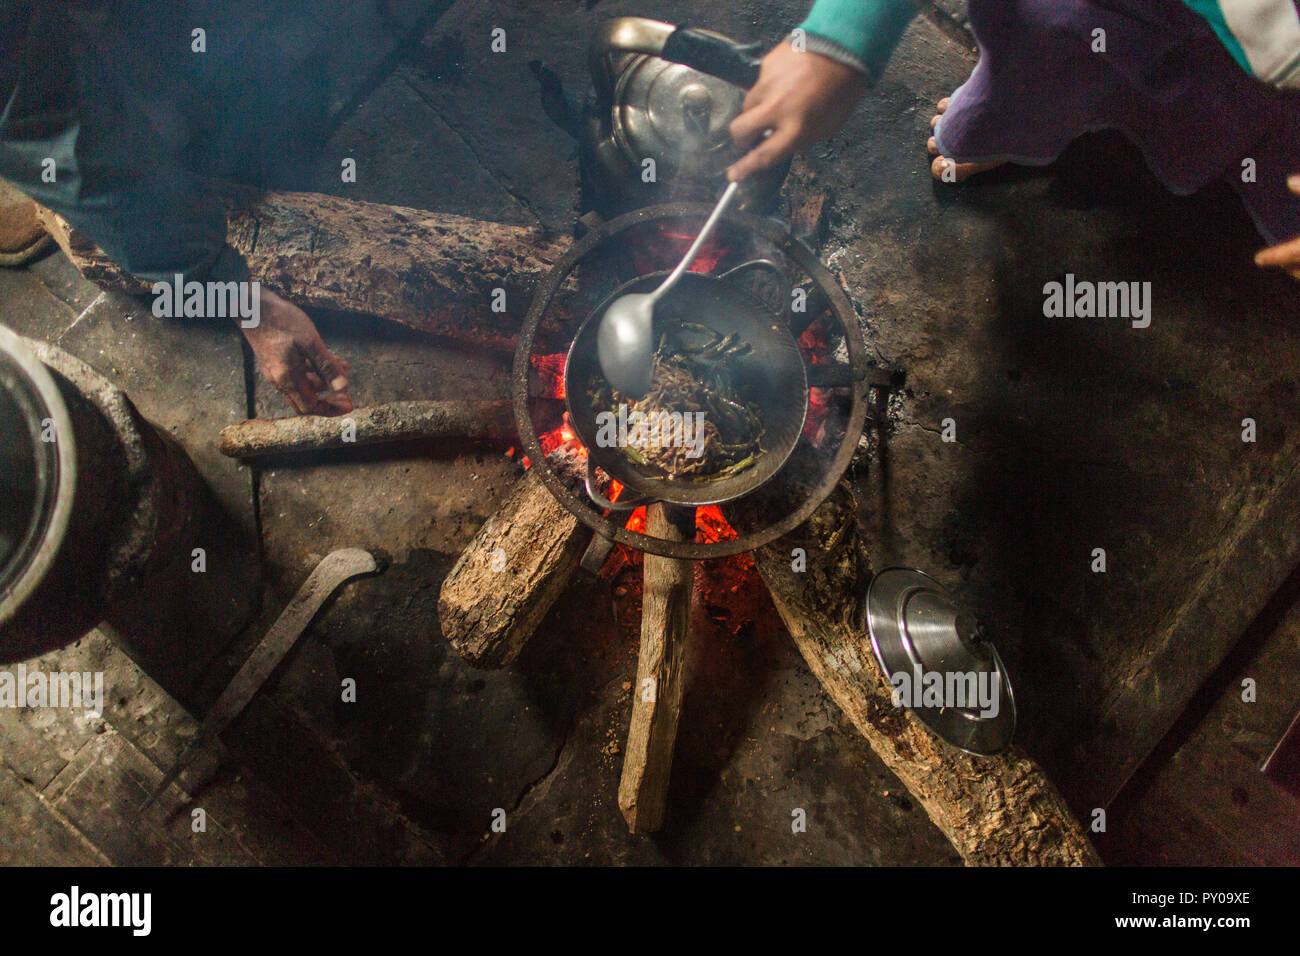 Directly above view of people cooking indoors over small campfire, Myanmar, Shan, Myanmar Stock Photo